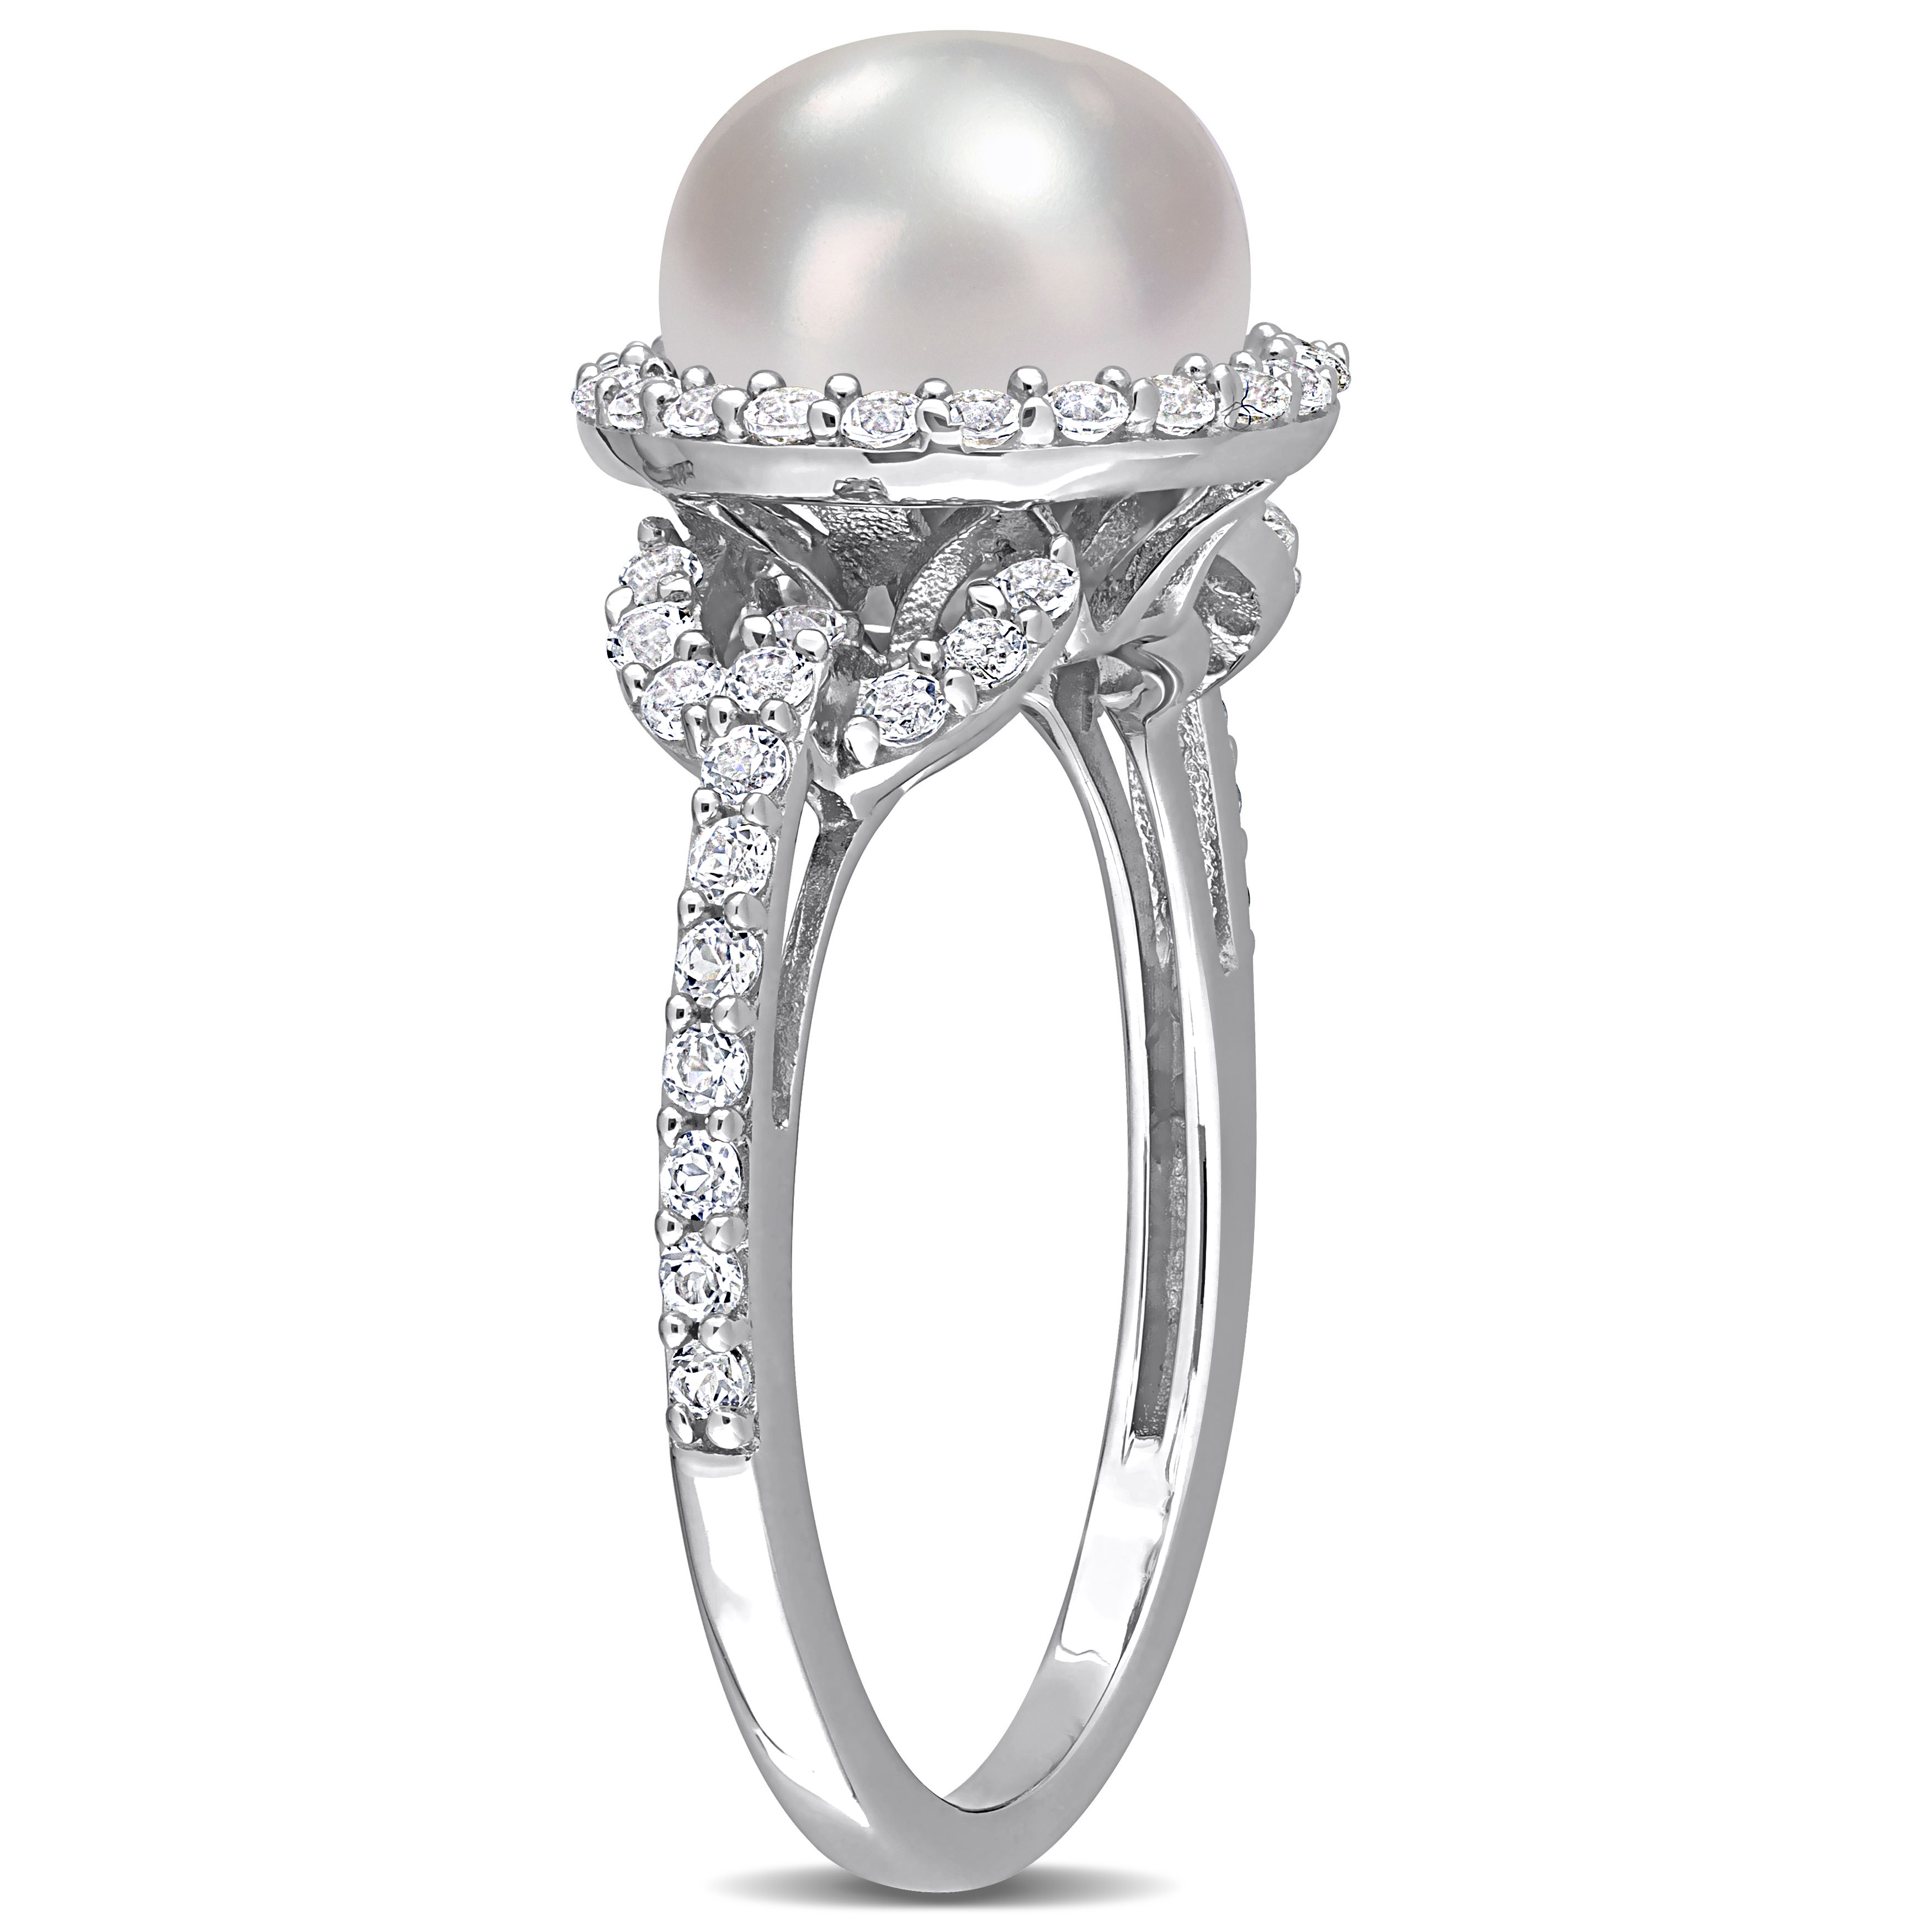 8.5-9 MM Cultured Freshwater Pearl and 3/4 CT TGW White Topaz Halo Ring in Sterling Silver